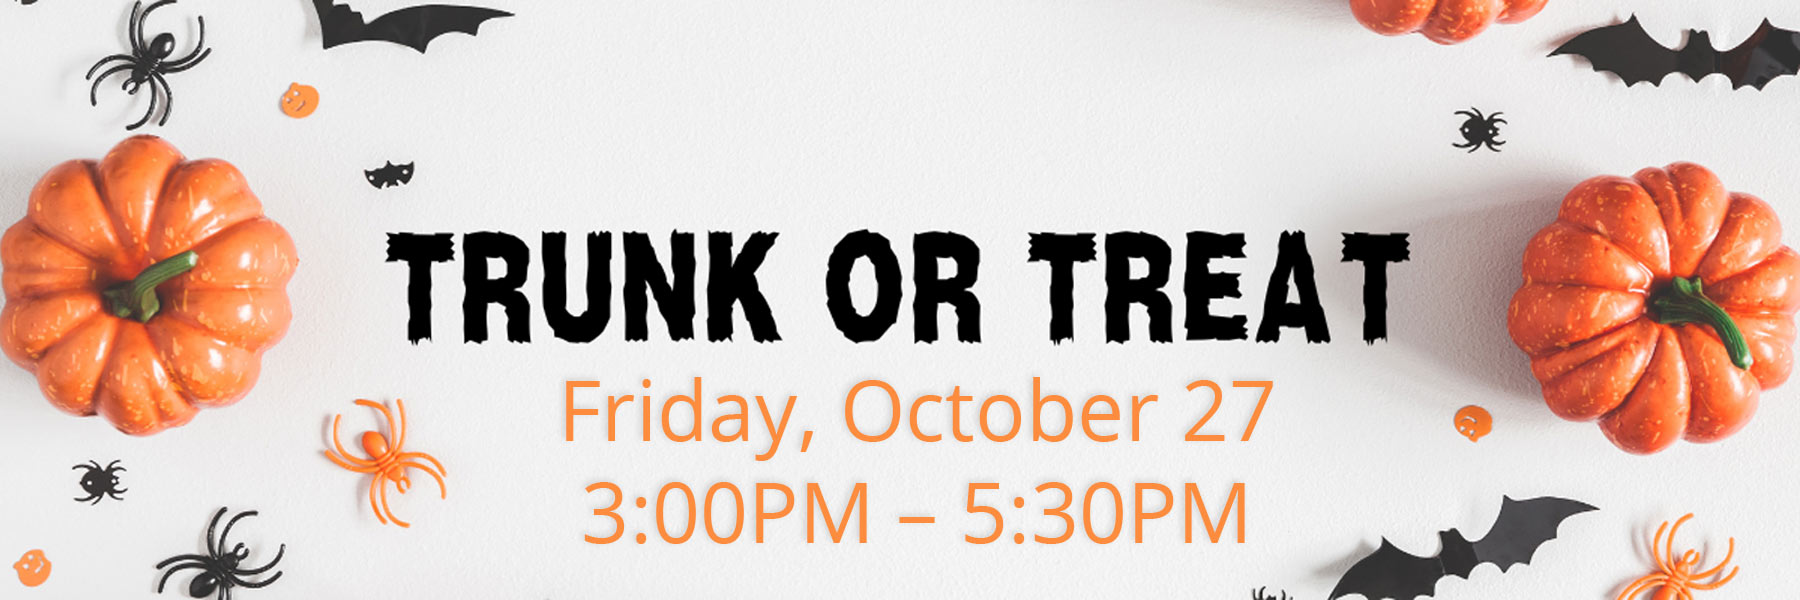 trunk or treat at carrier law